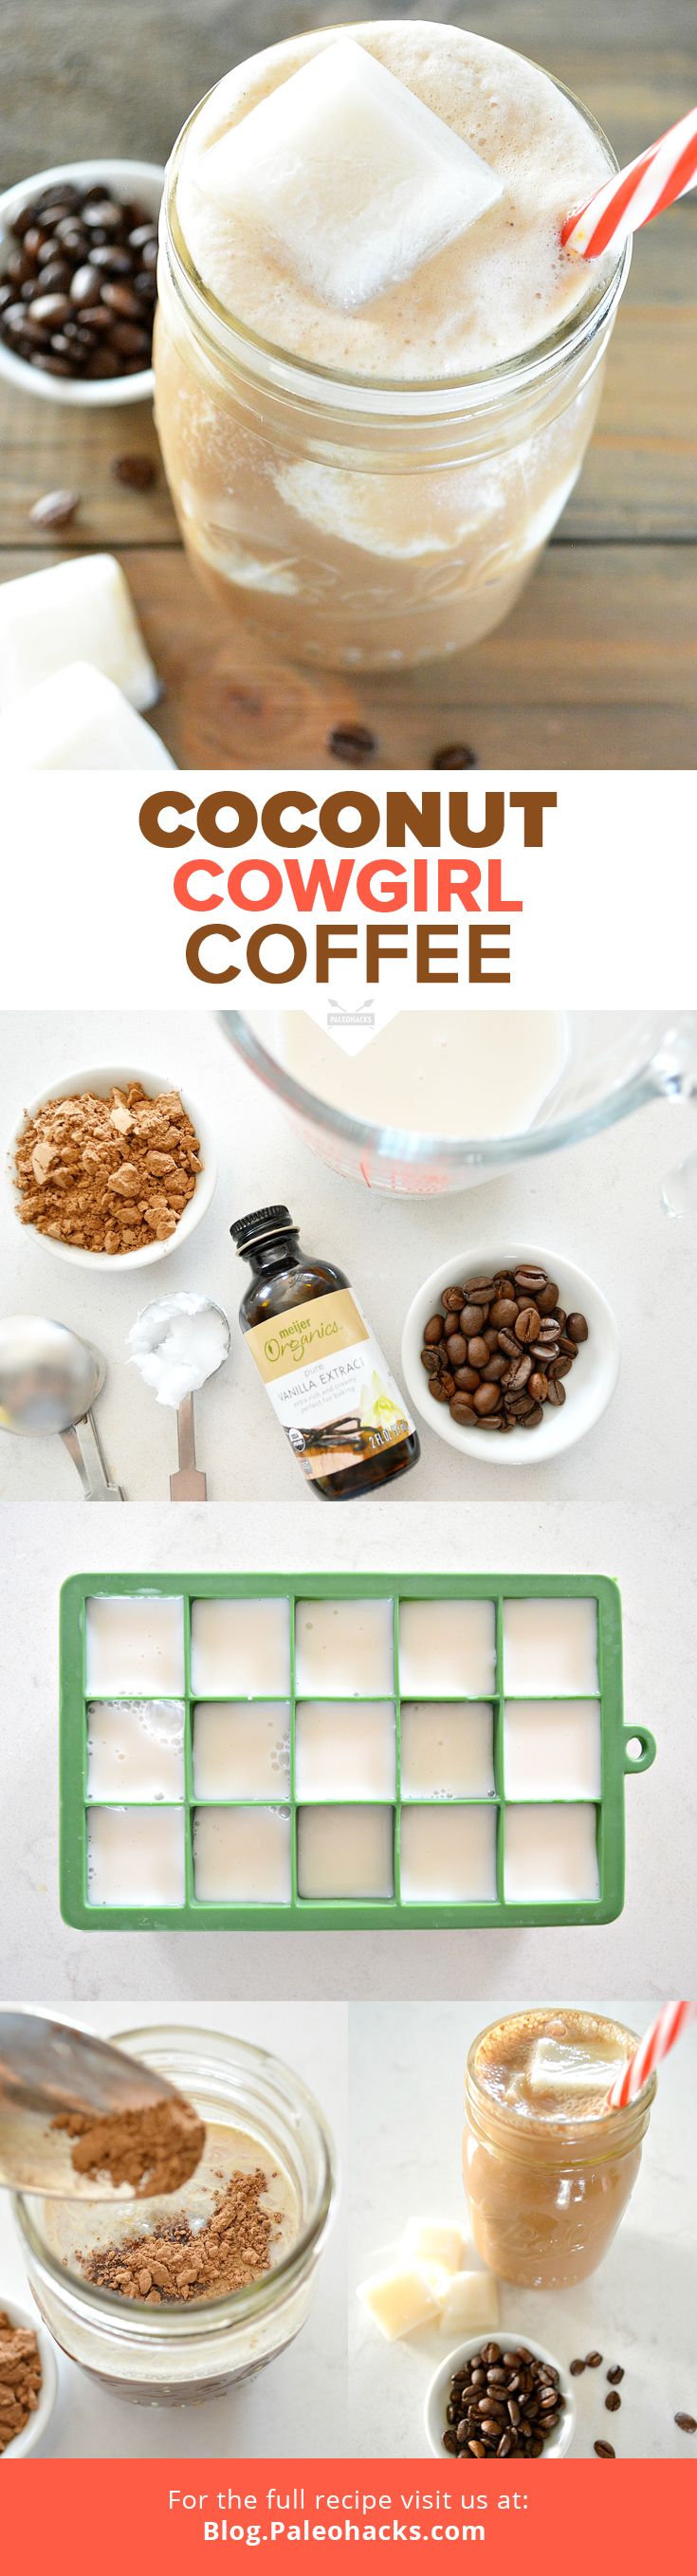 Start the morning off right with this rich and delicious Paleo Coconut Cowgirl Coffee.